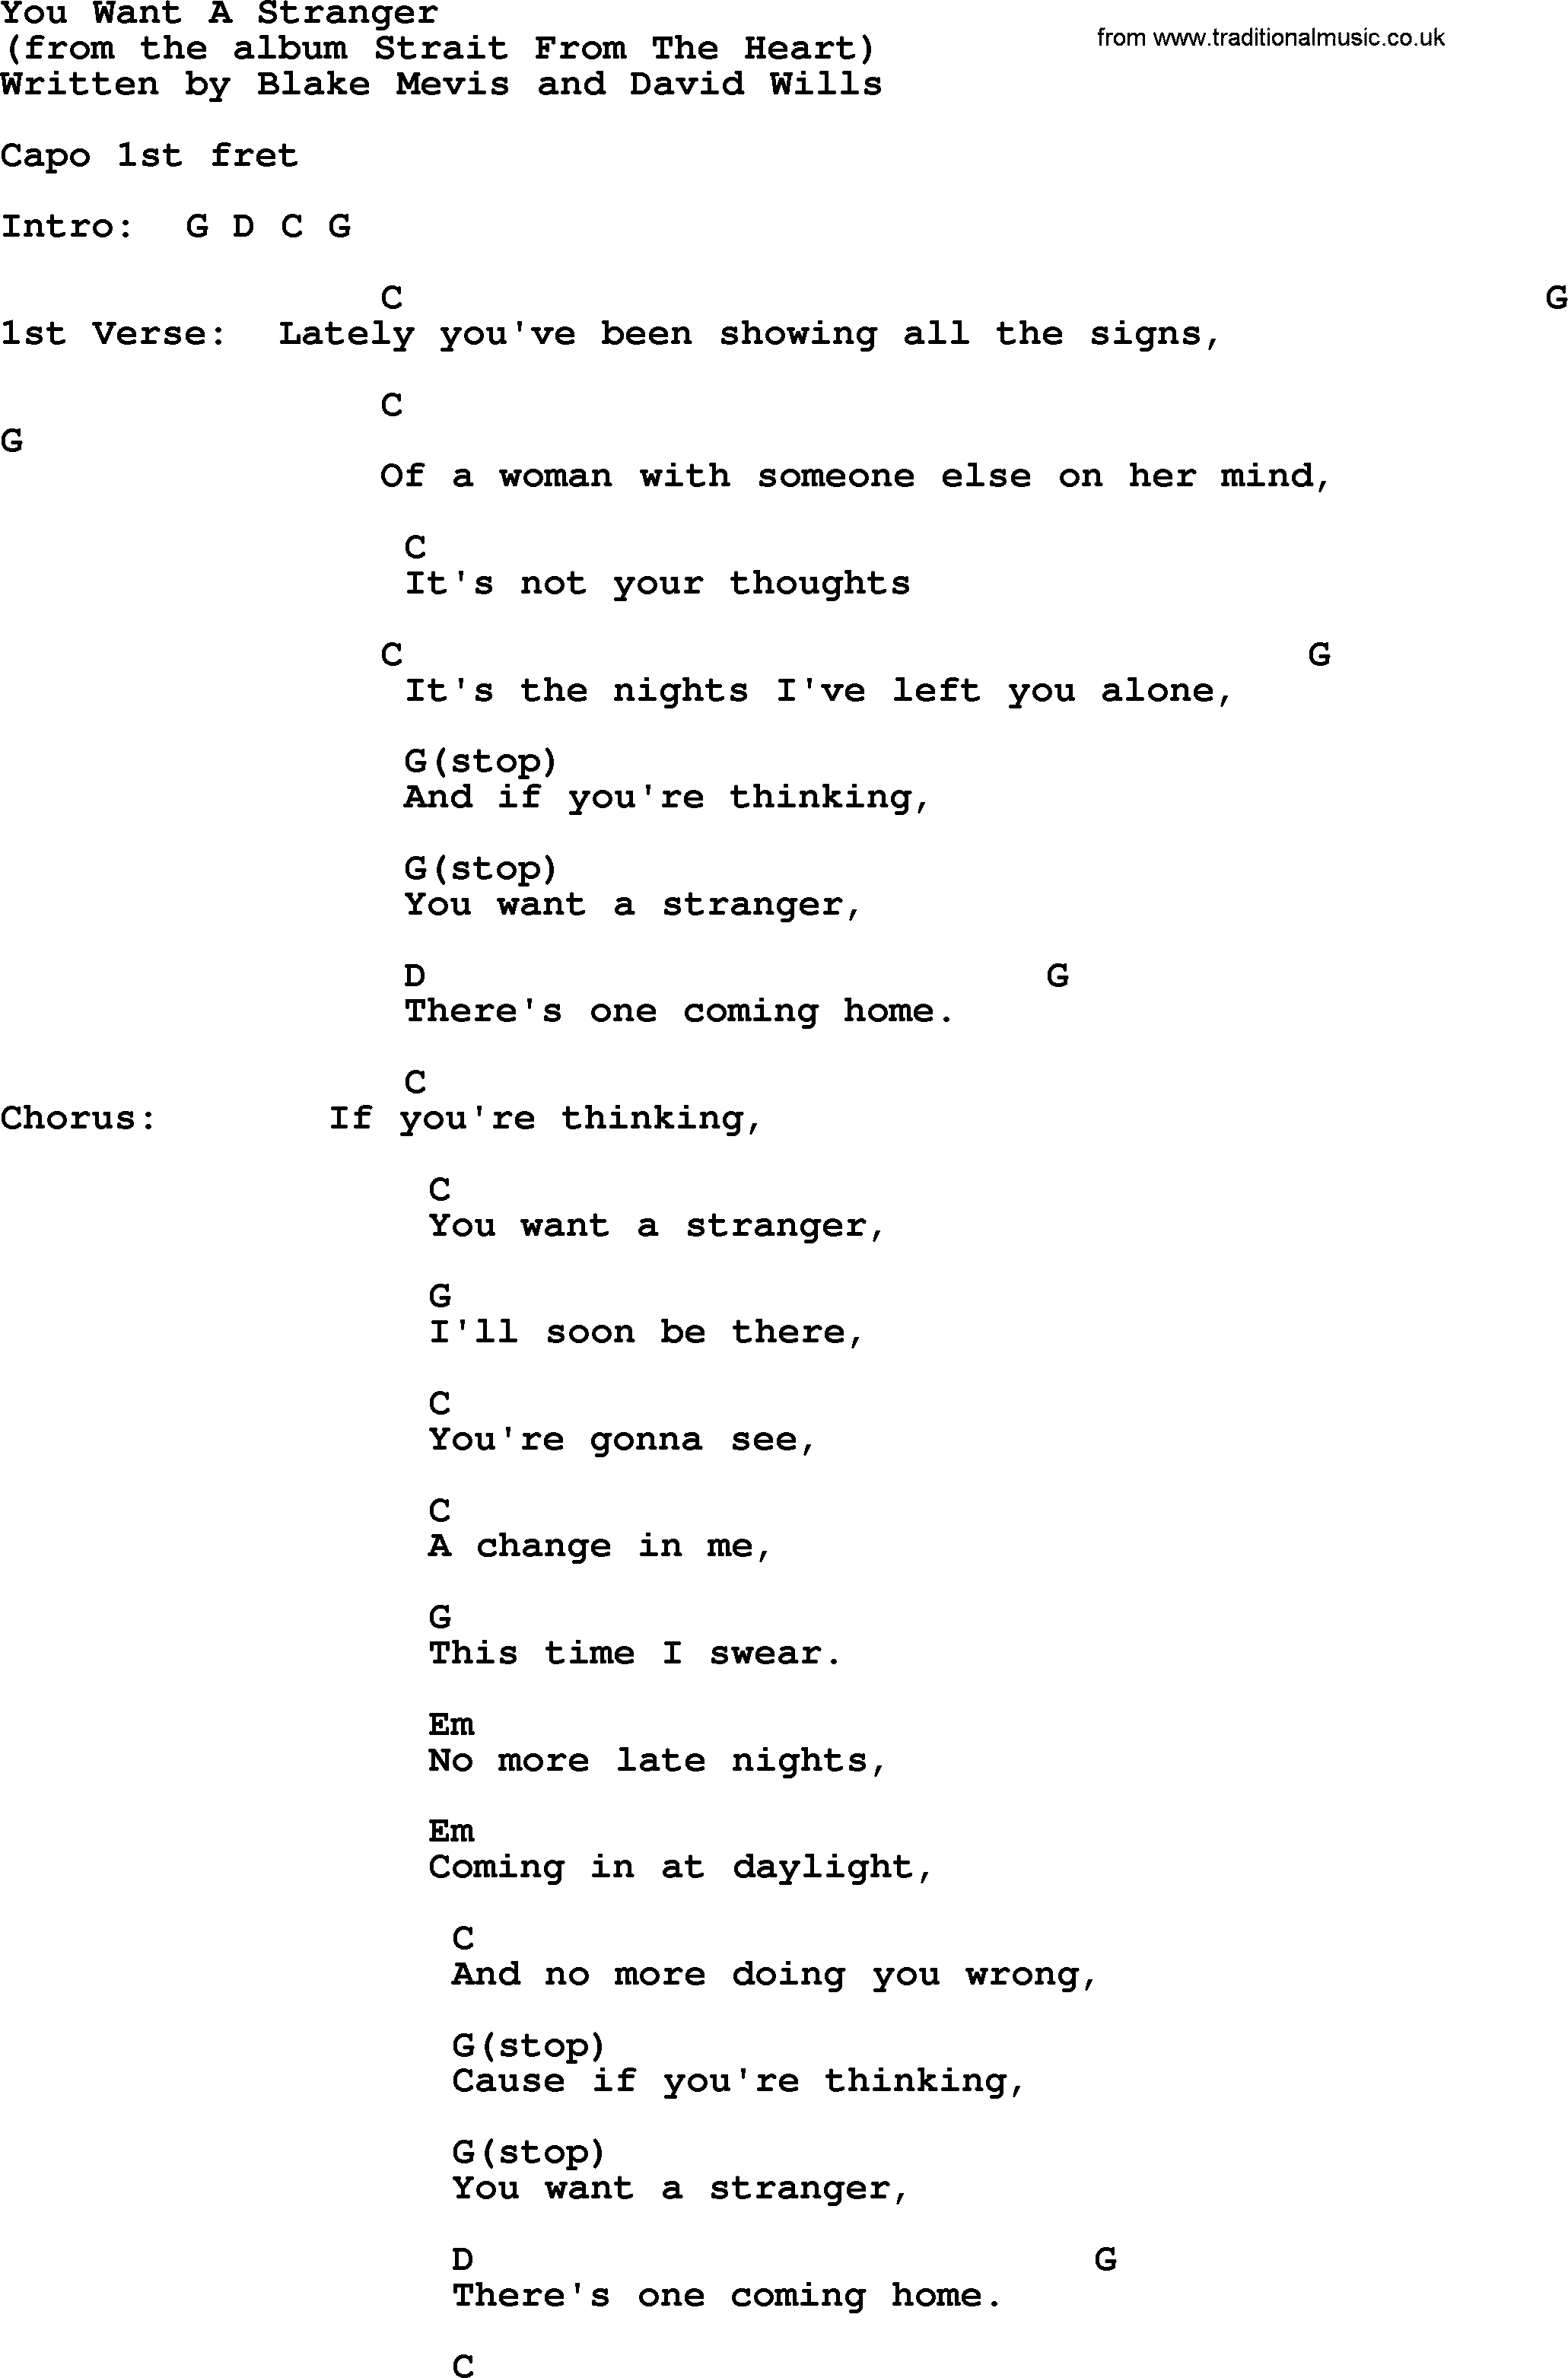 George Strait song: You Want A Stranger, lyrics and chords